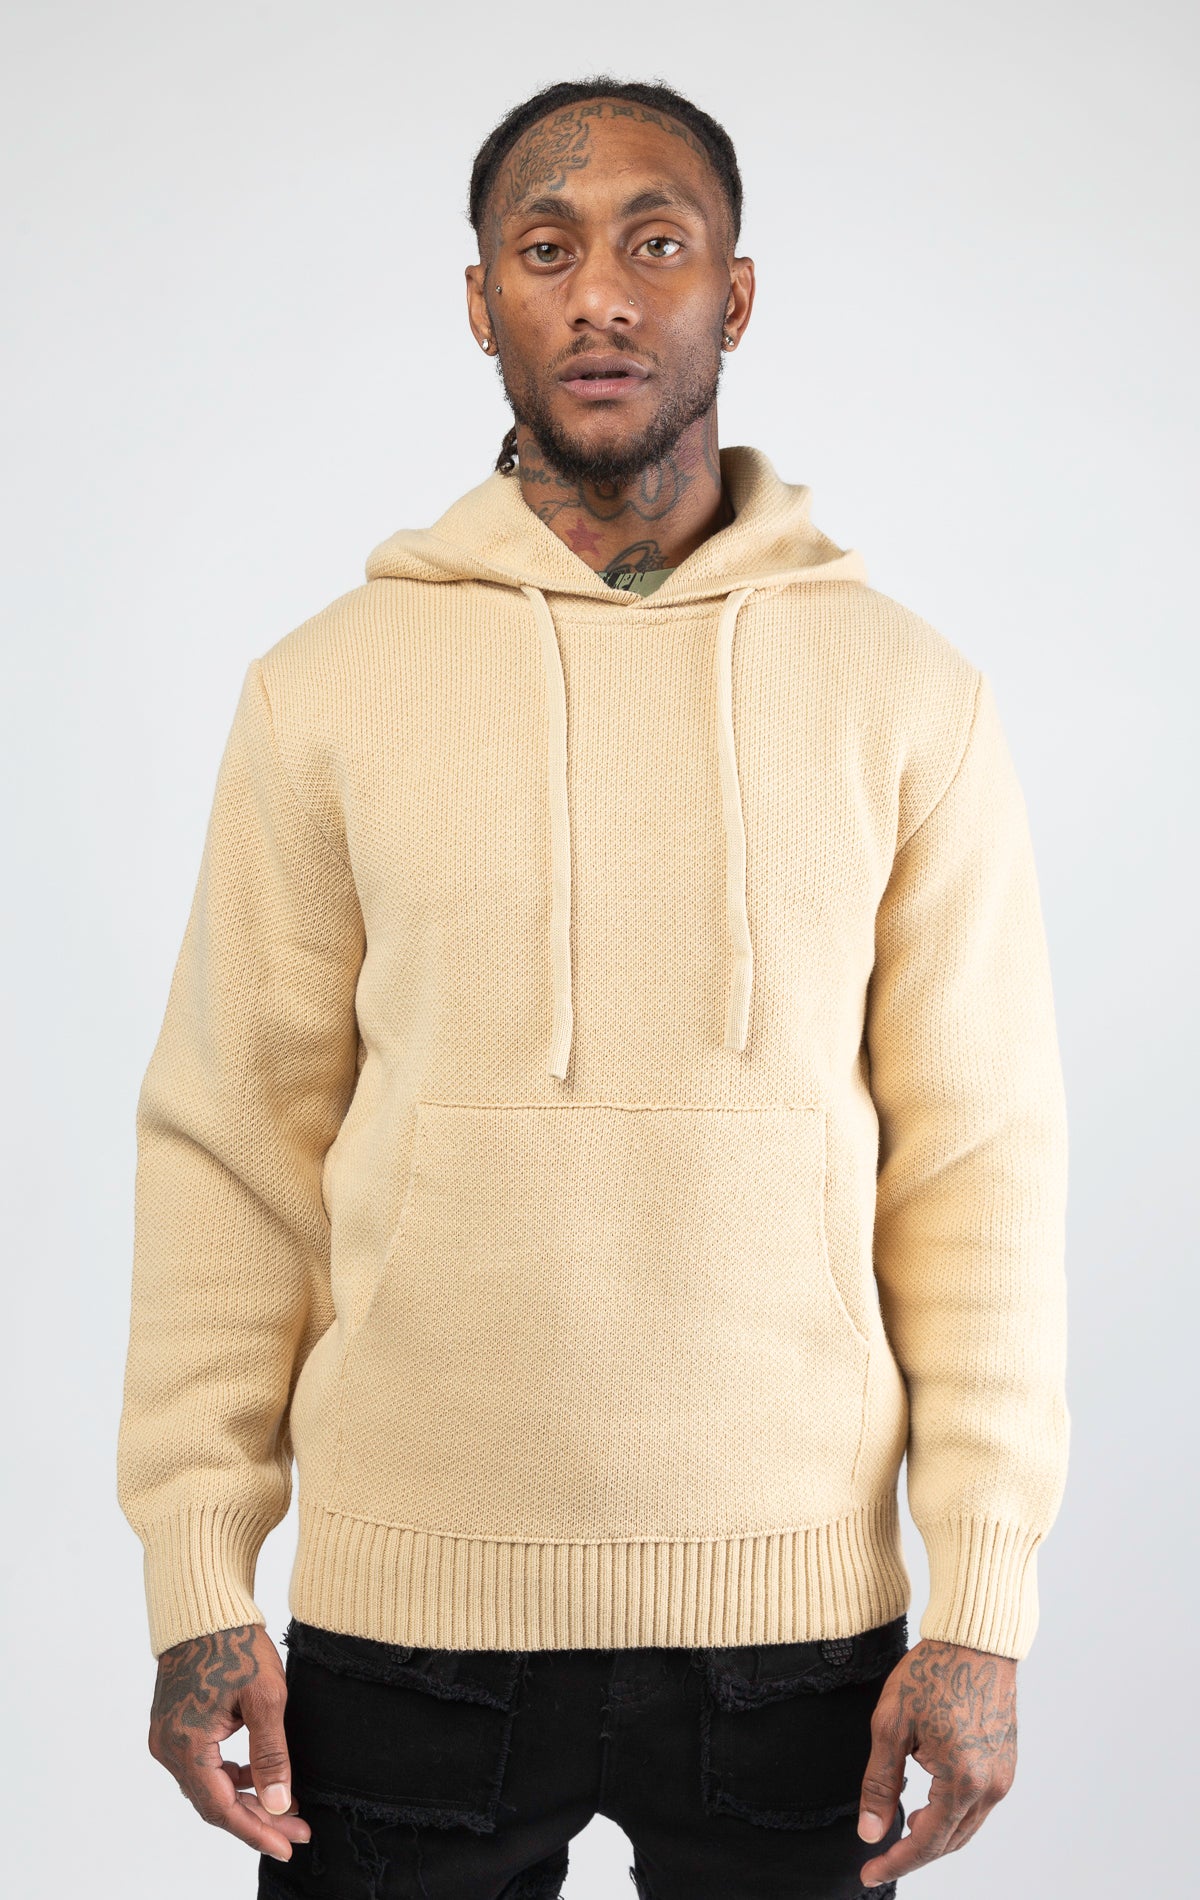 A stylish and comfortable Knitted Jersey Hooded Sweater in sand color, featuring a relaxed fit, a hood, and luxuriously soft knitted jersey fabric.